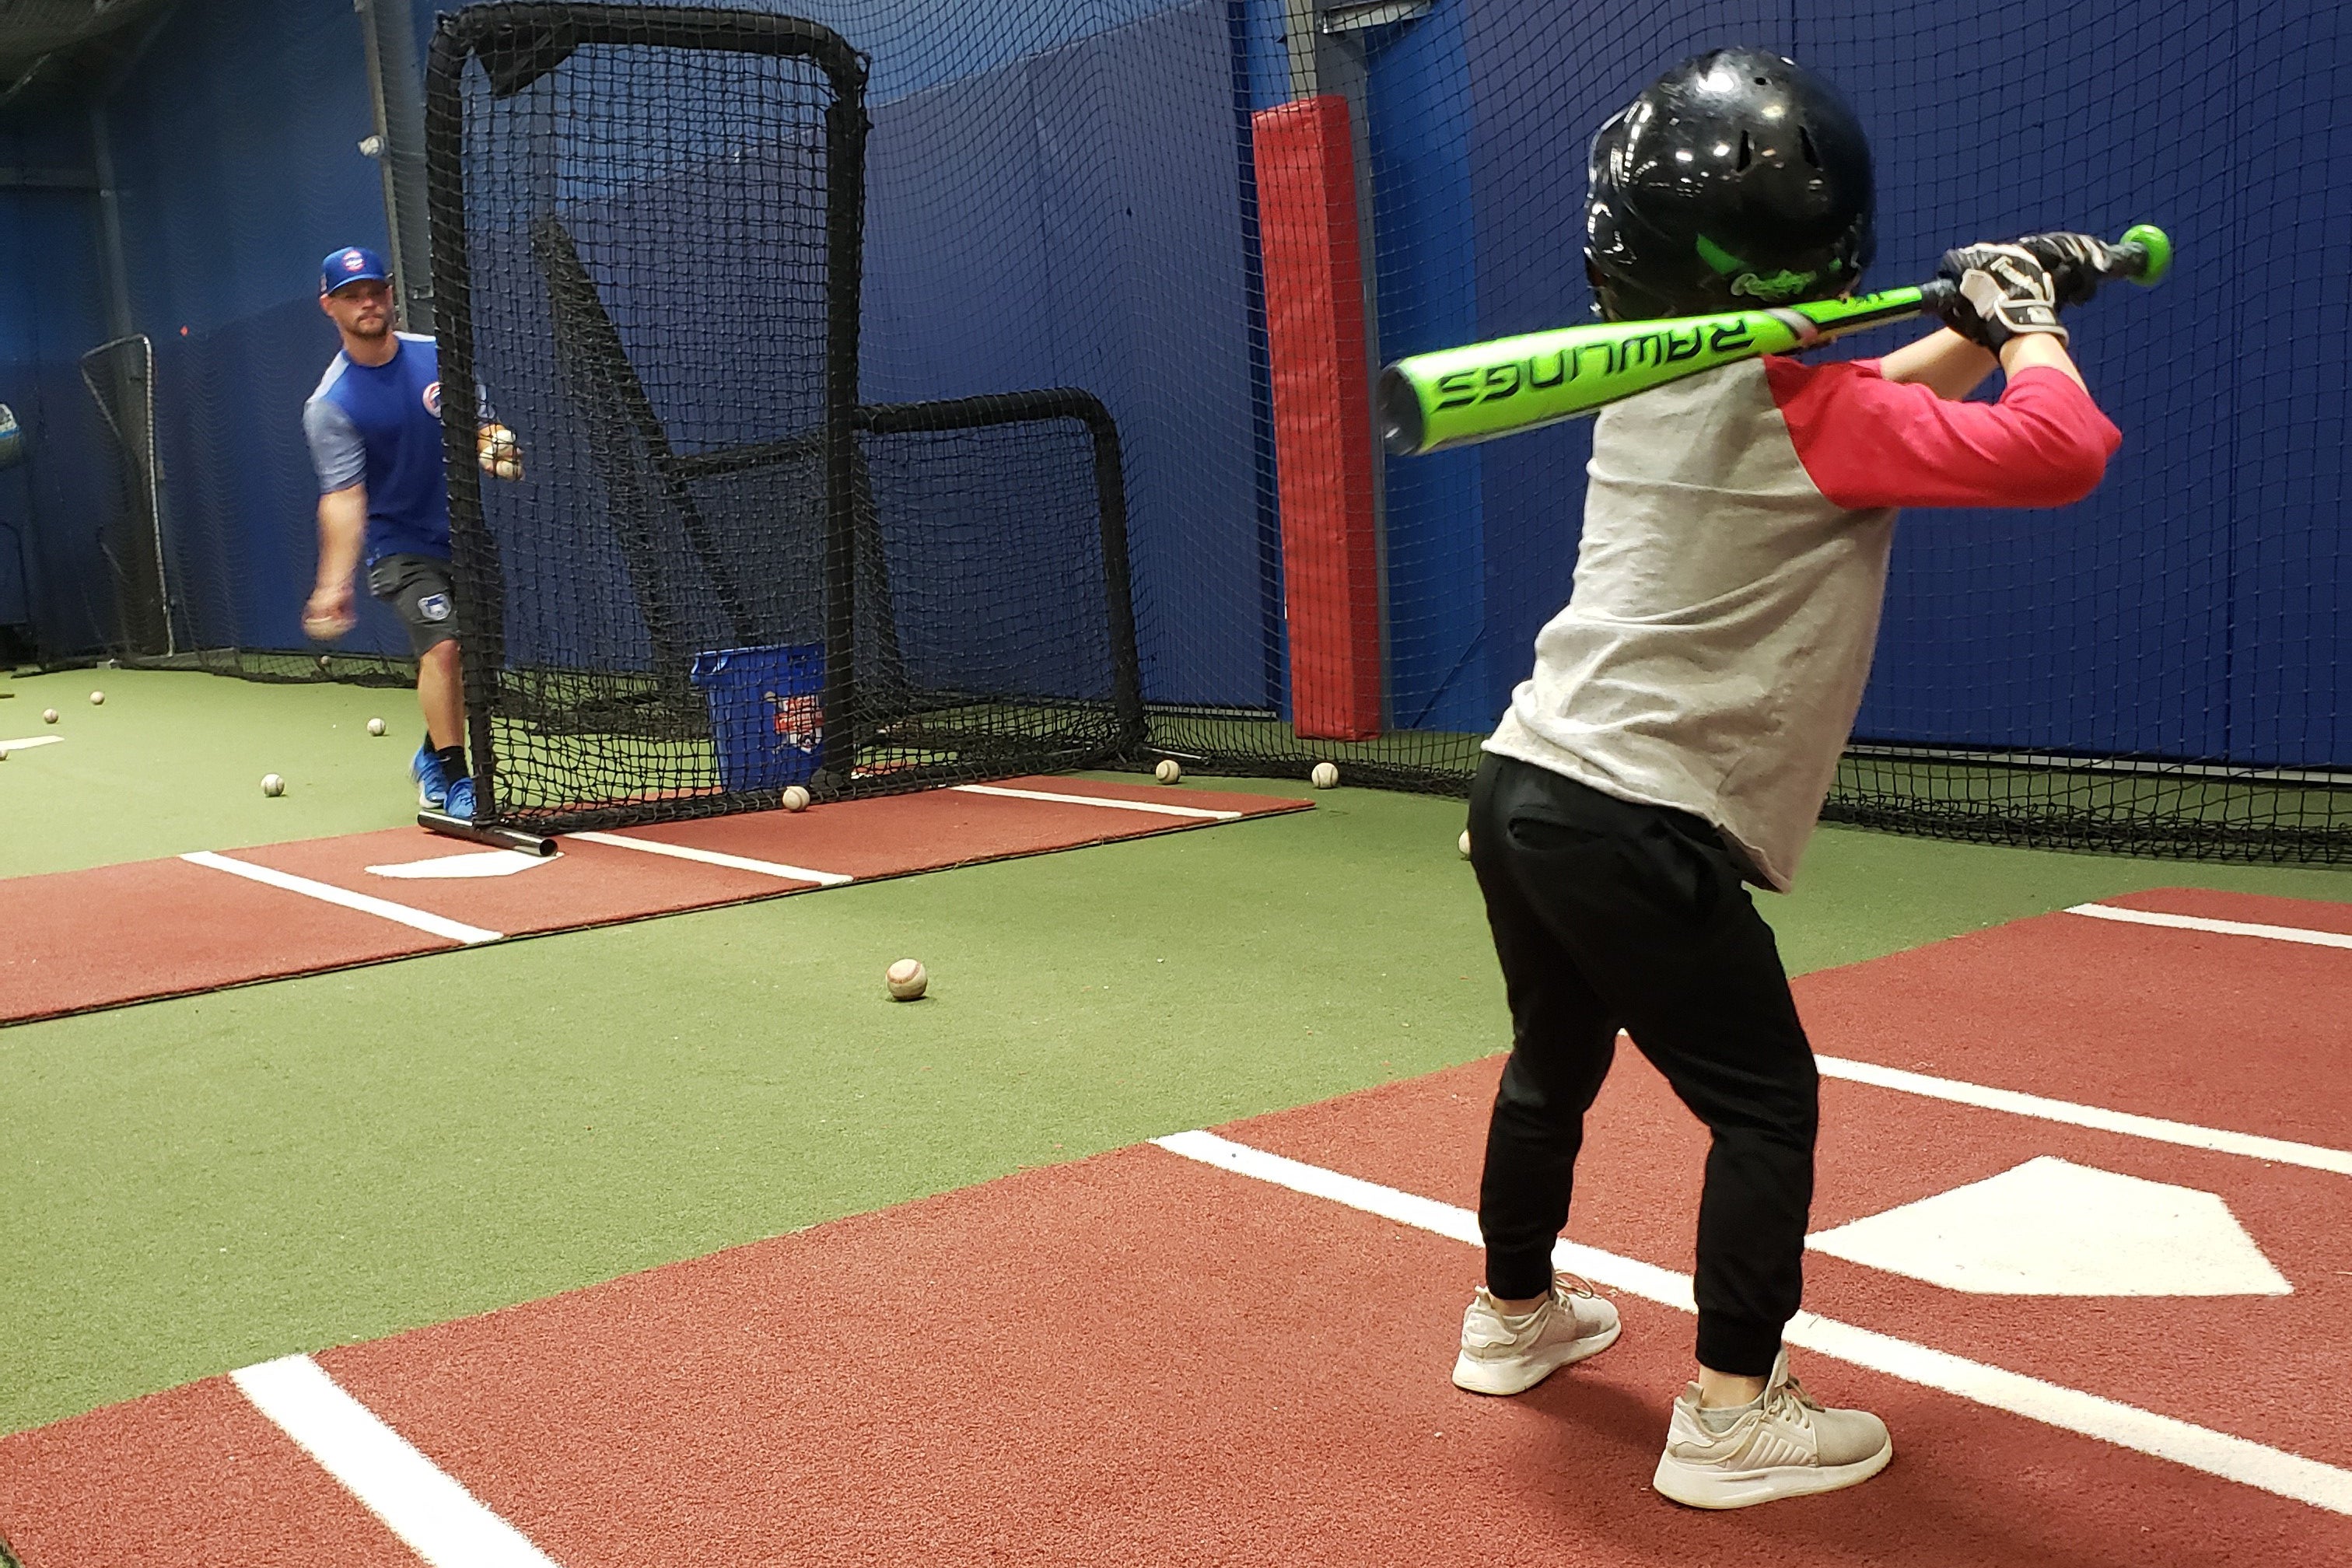 South Bend Cubs Performance Center offers batting cages open to public